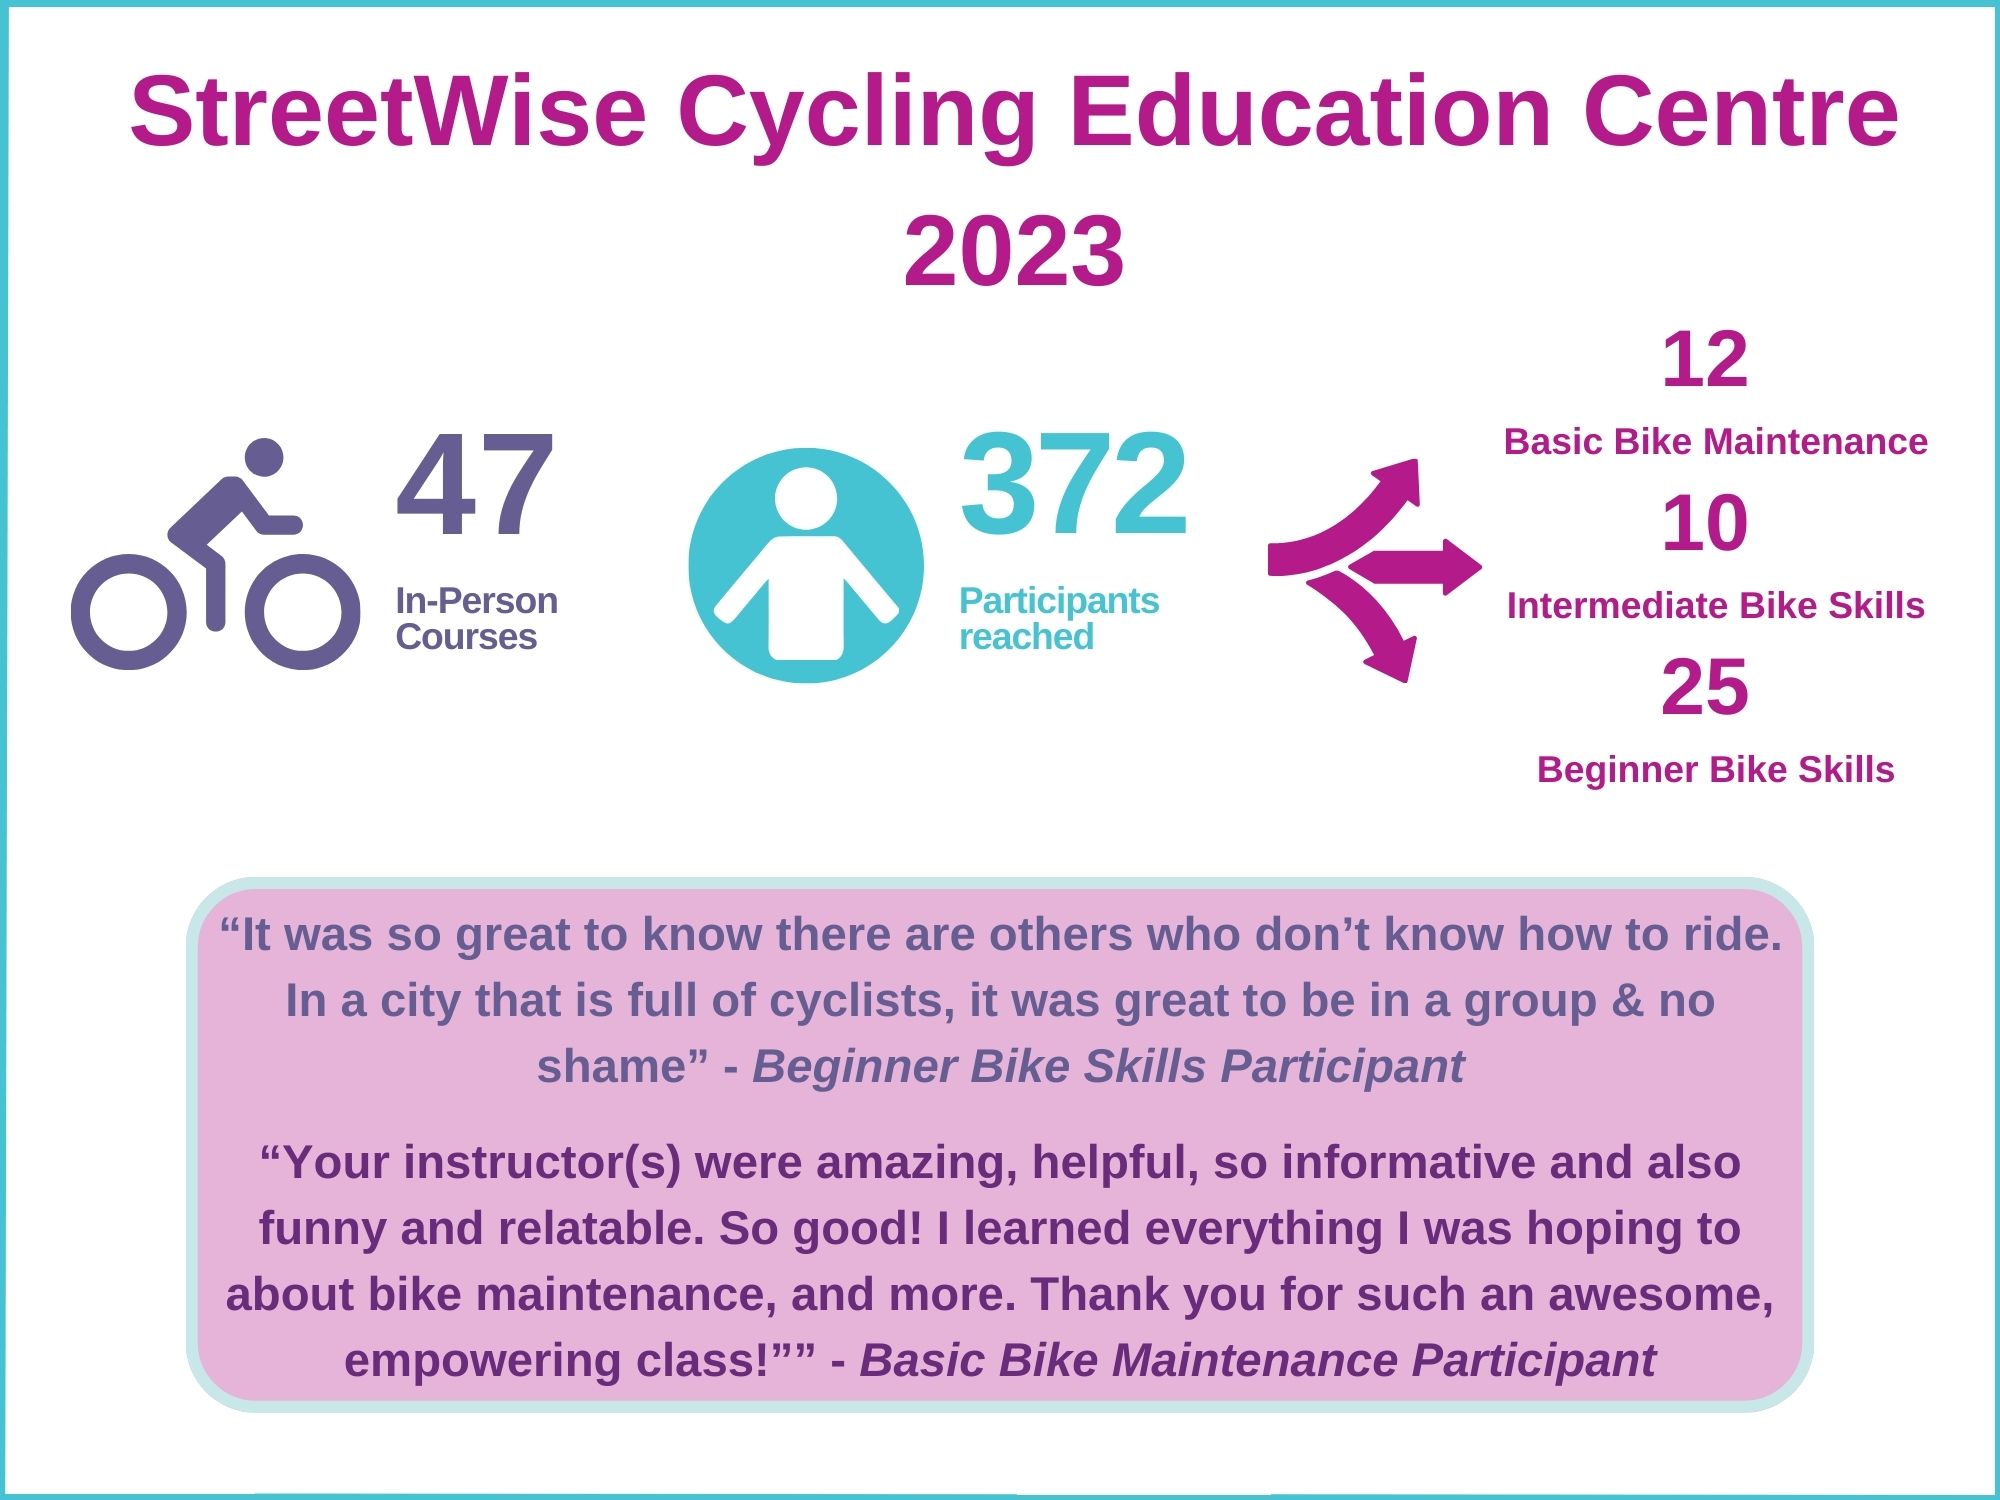 StreetWise Cycling Education Centre 2023 stats. 47 in-person courses. 372 participants reached, 12 basic bike maintenance courses, 10 intermediate bike skills, and 25 beginner bike skills courses., 